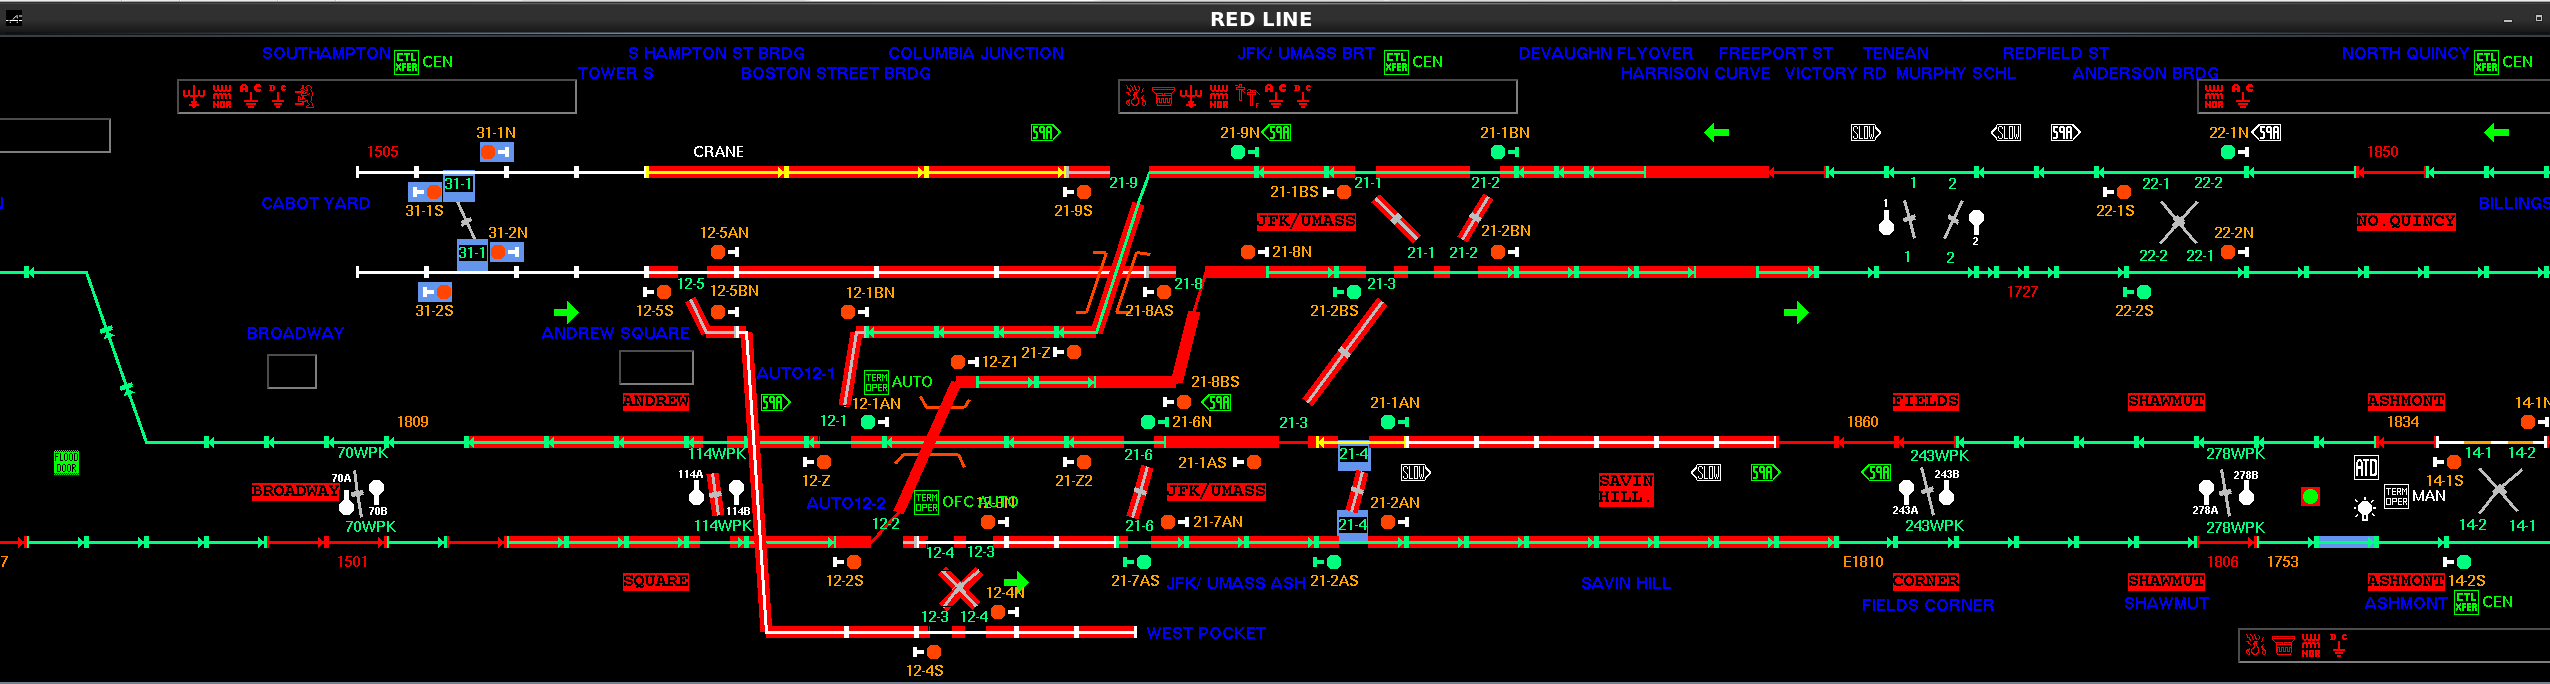 The screen at the Operations Control Center after the derailment, showing multiple areas highlighted in red, indicating code failure for signals and switches on the Red Line.